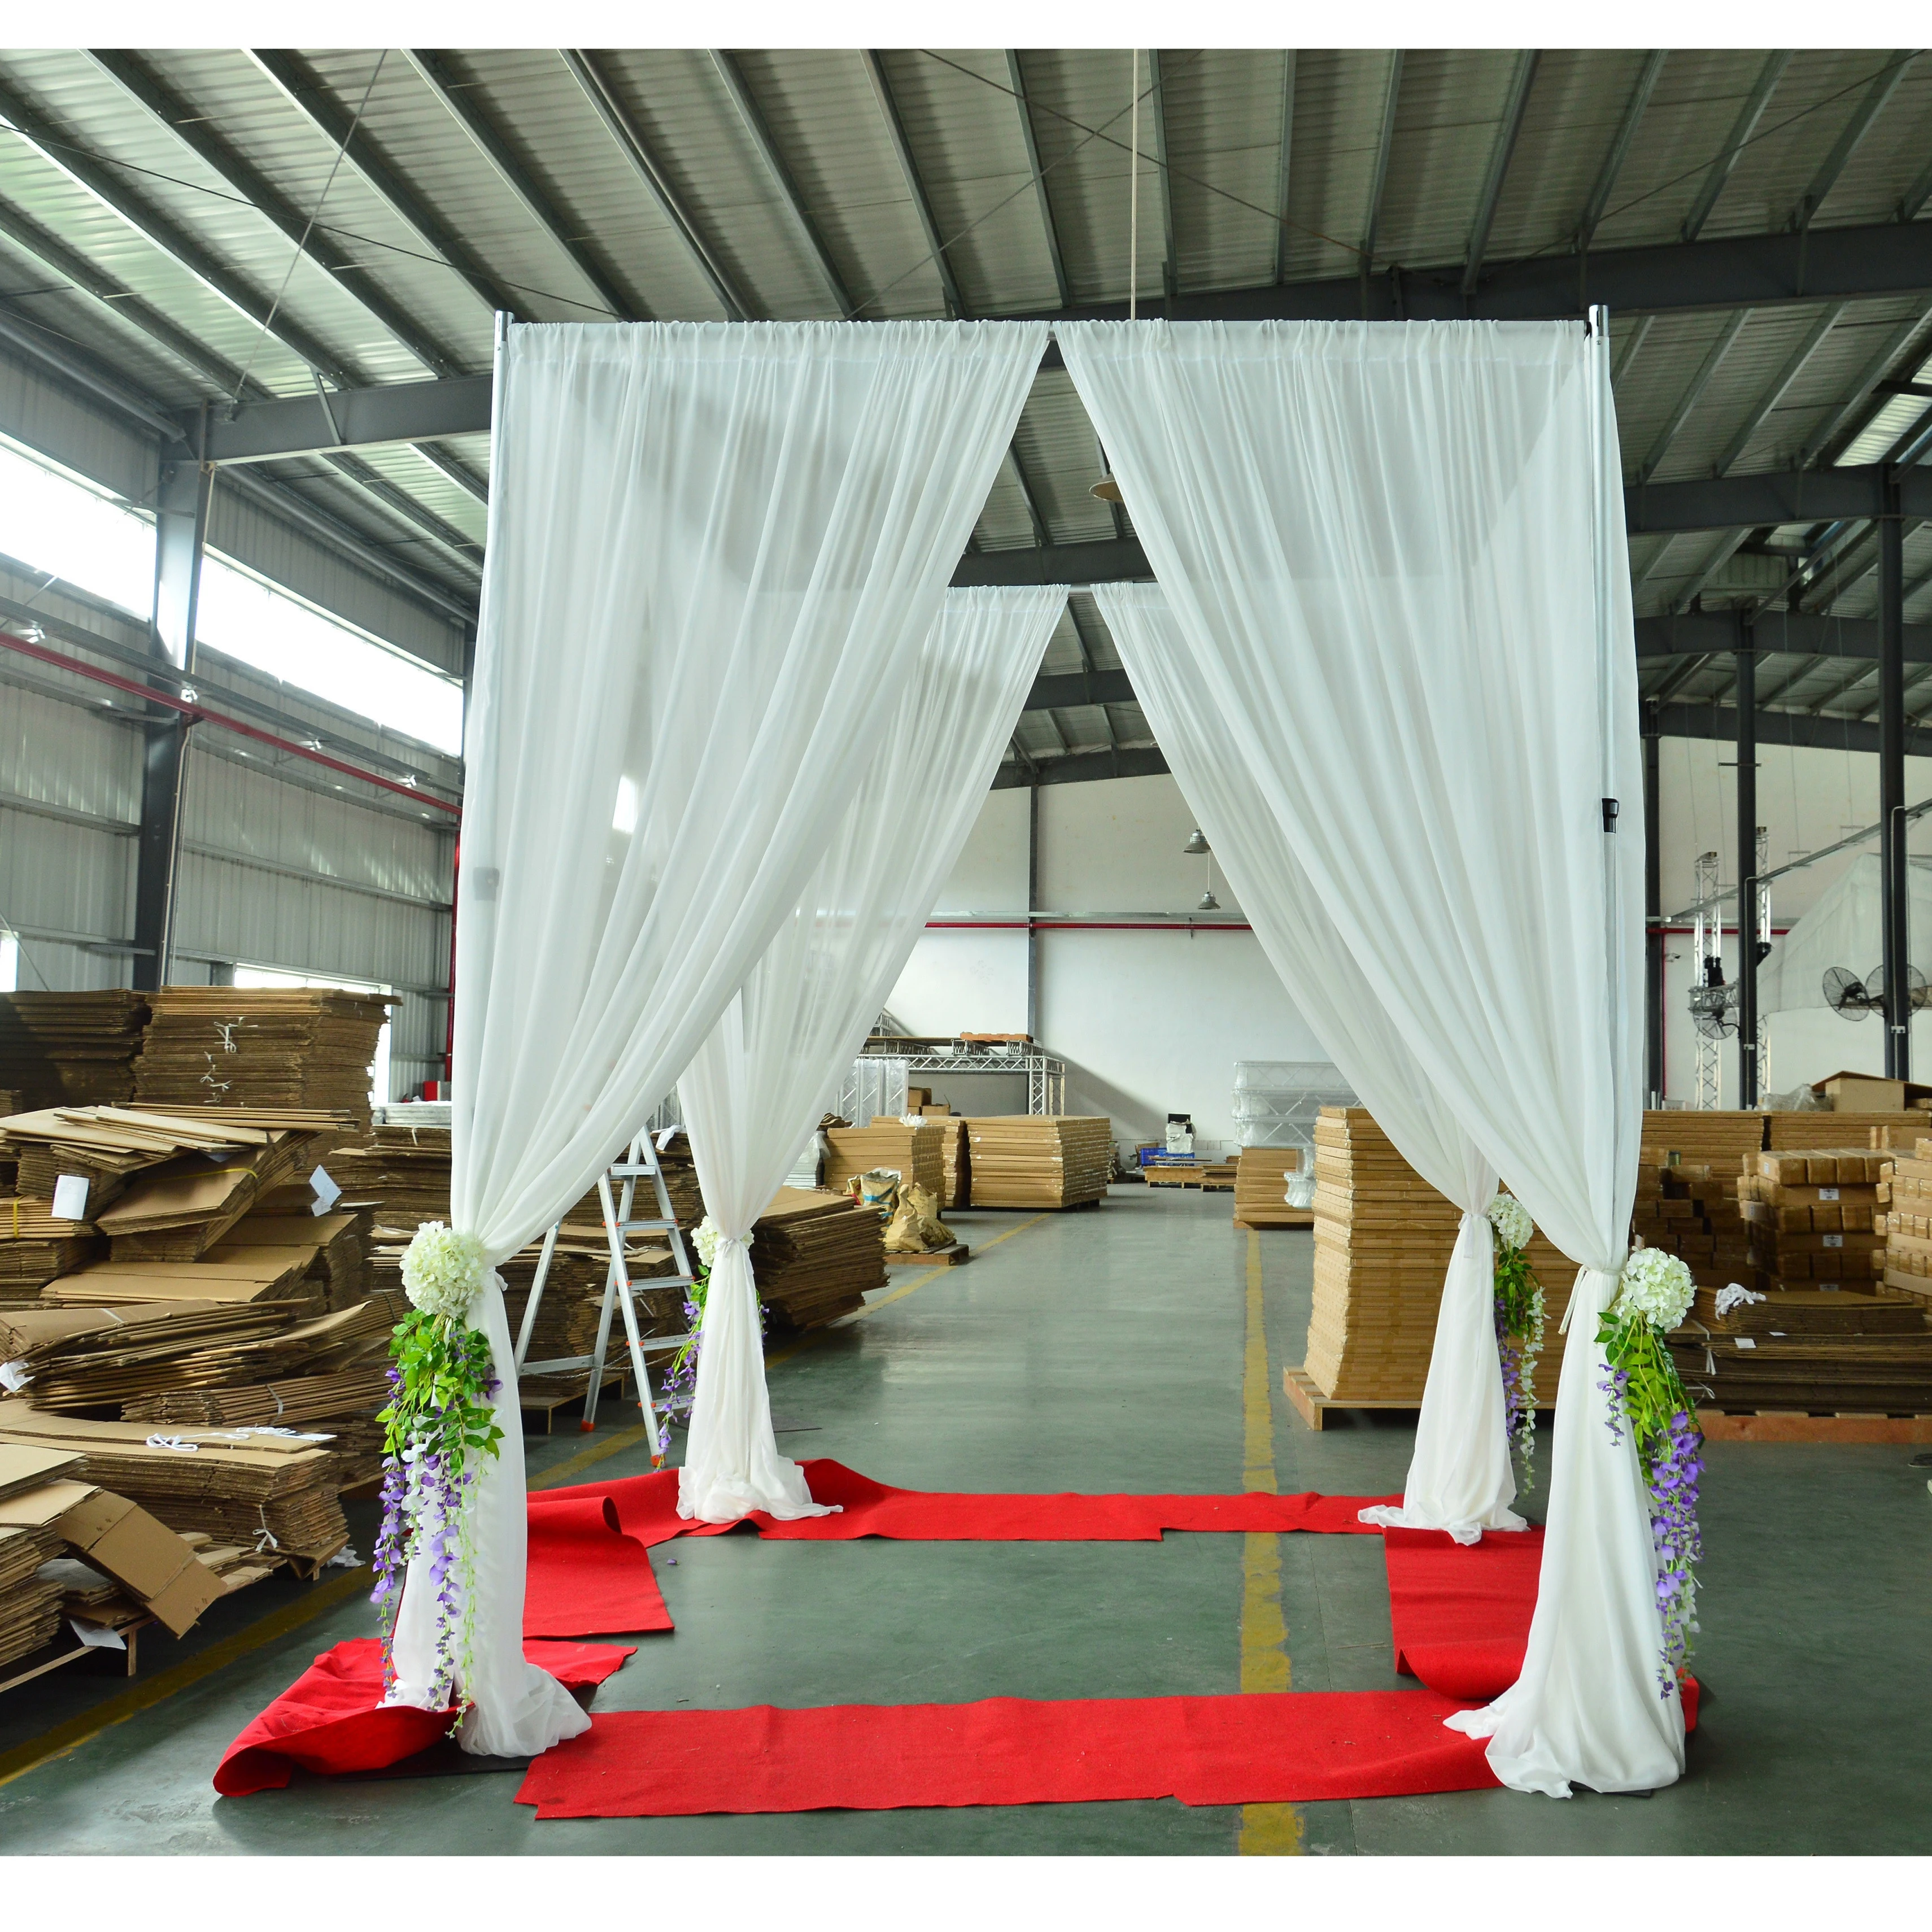 Aluminum portable pipe and drape backdrop stand for event decorating services